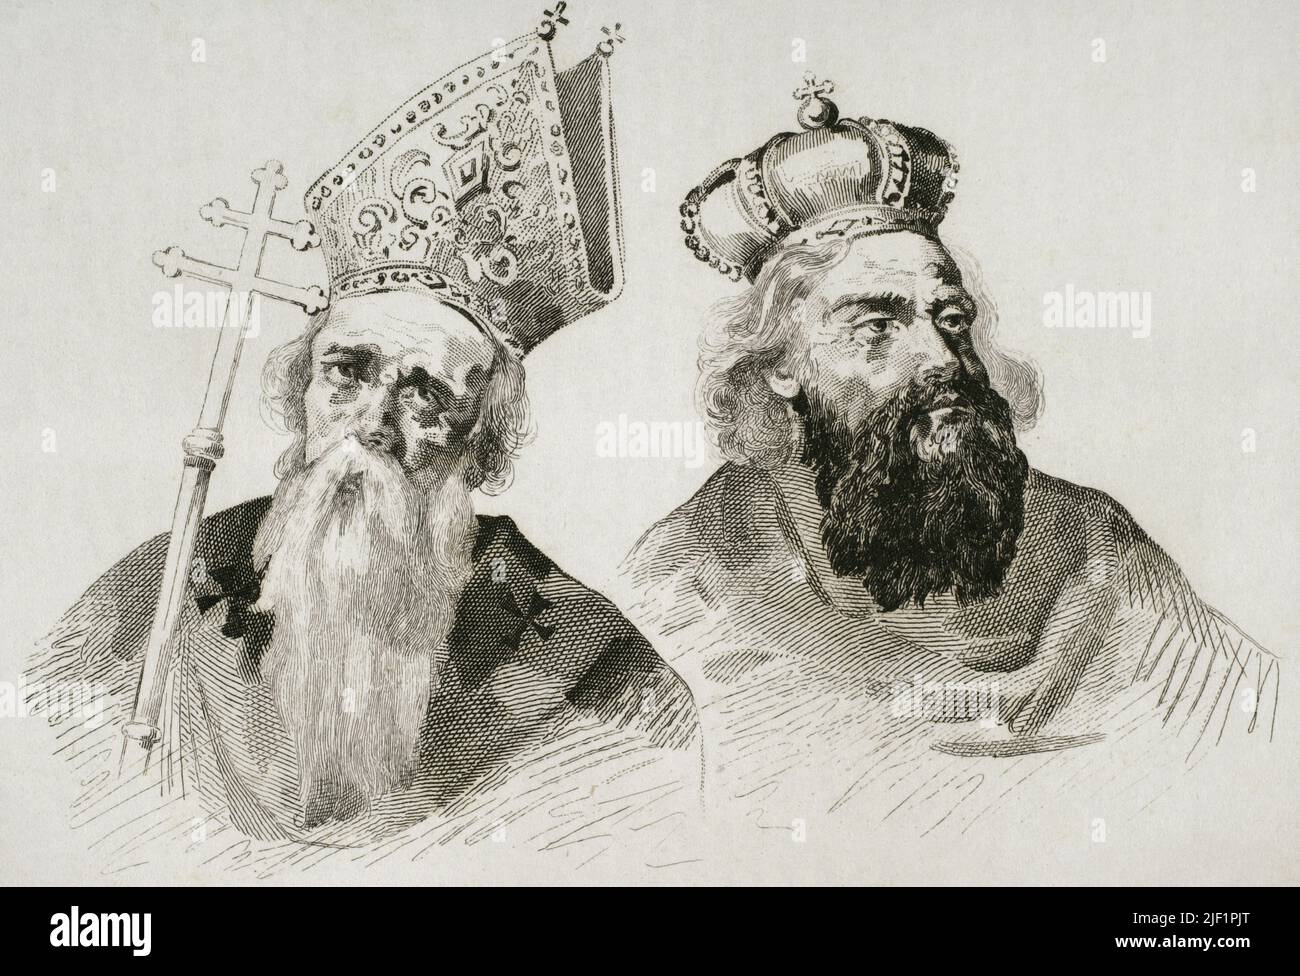 Saint Gregory Magister and Saint Gregory Vegaiaser. Armenian Apostolic Church. Engraving drawn by H. Lalaisse. Engraved by Moret. Lemaitre direxit. Engraving. 'Panorama Universal. Historia de Armenia', 1838. Stock Photo